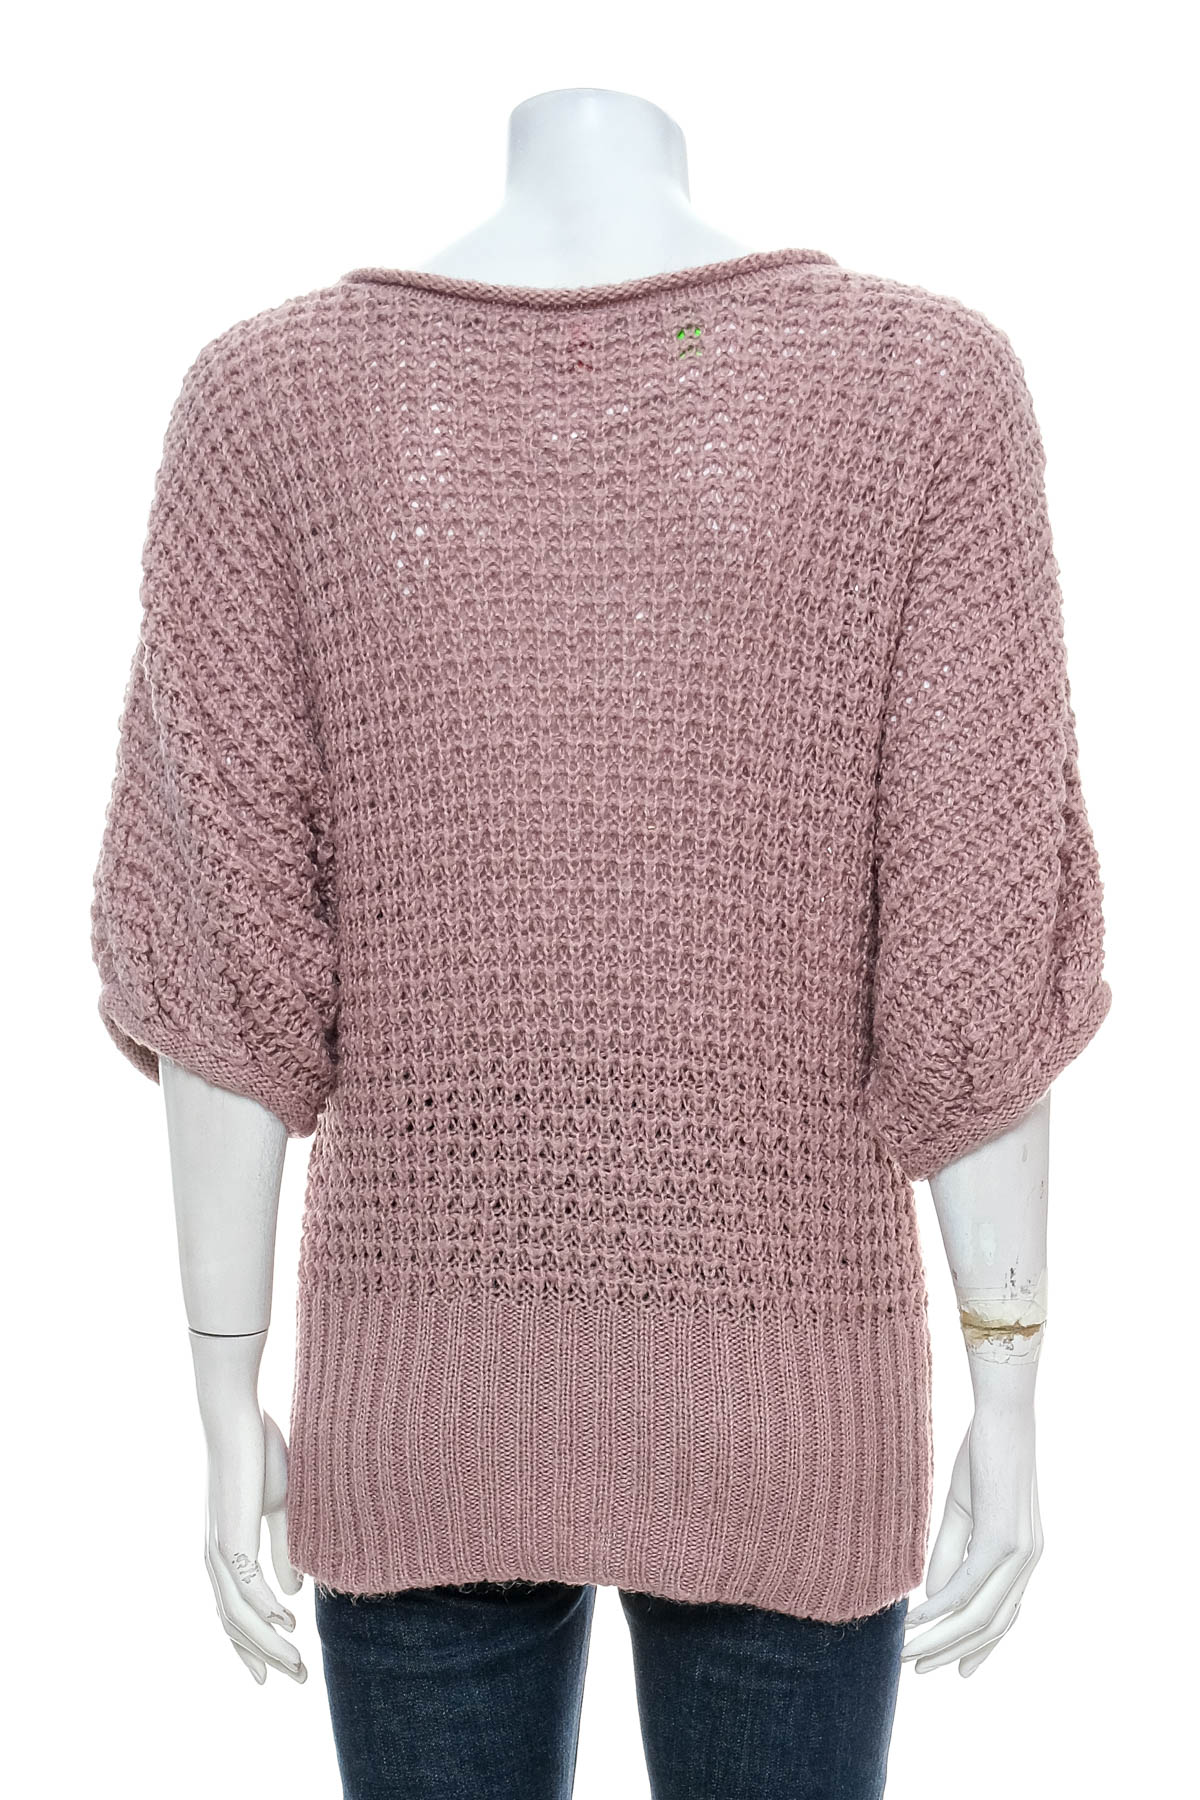 Women's sweater - QS by S.Oliver - 1